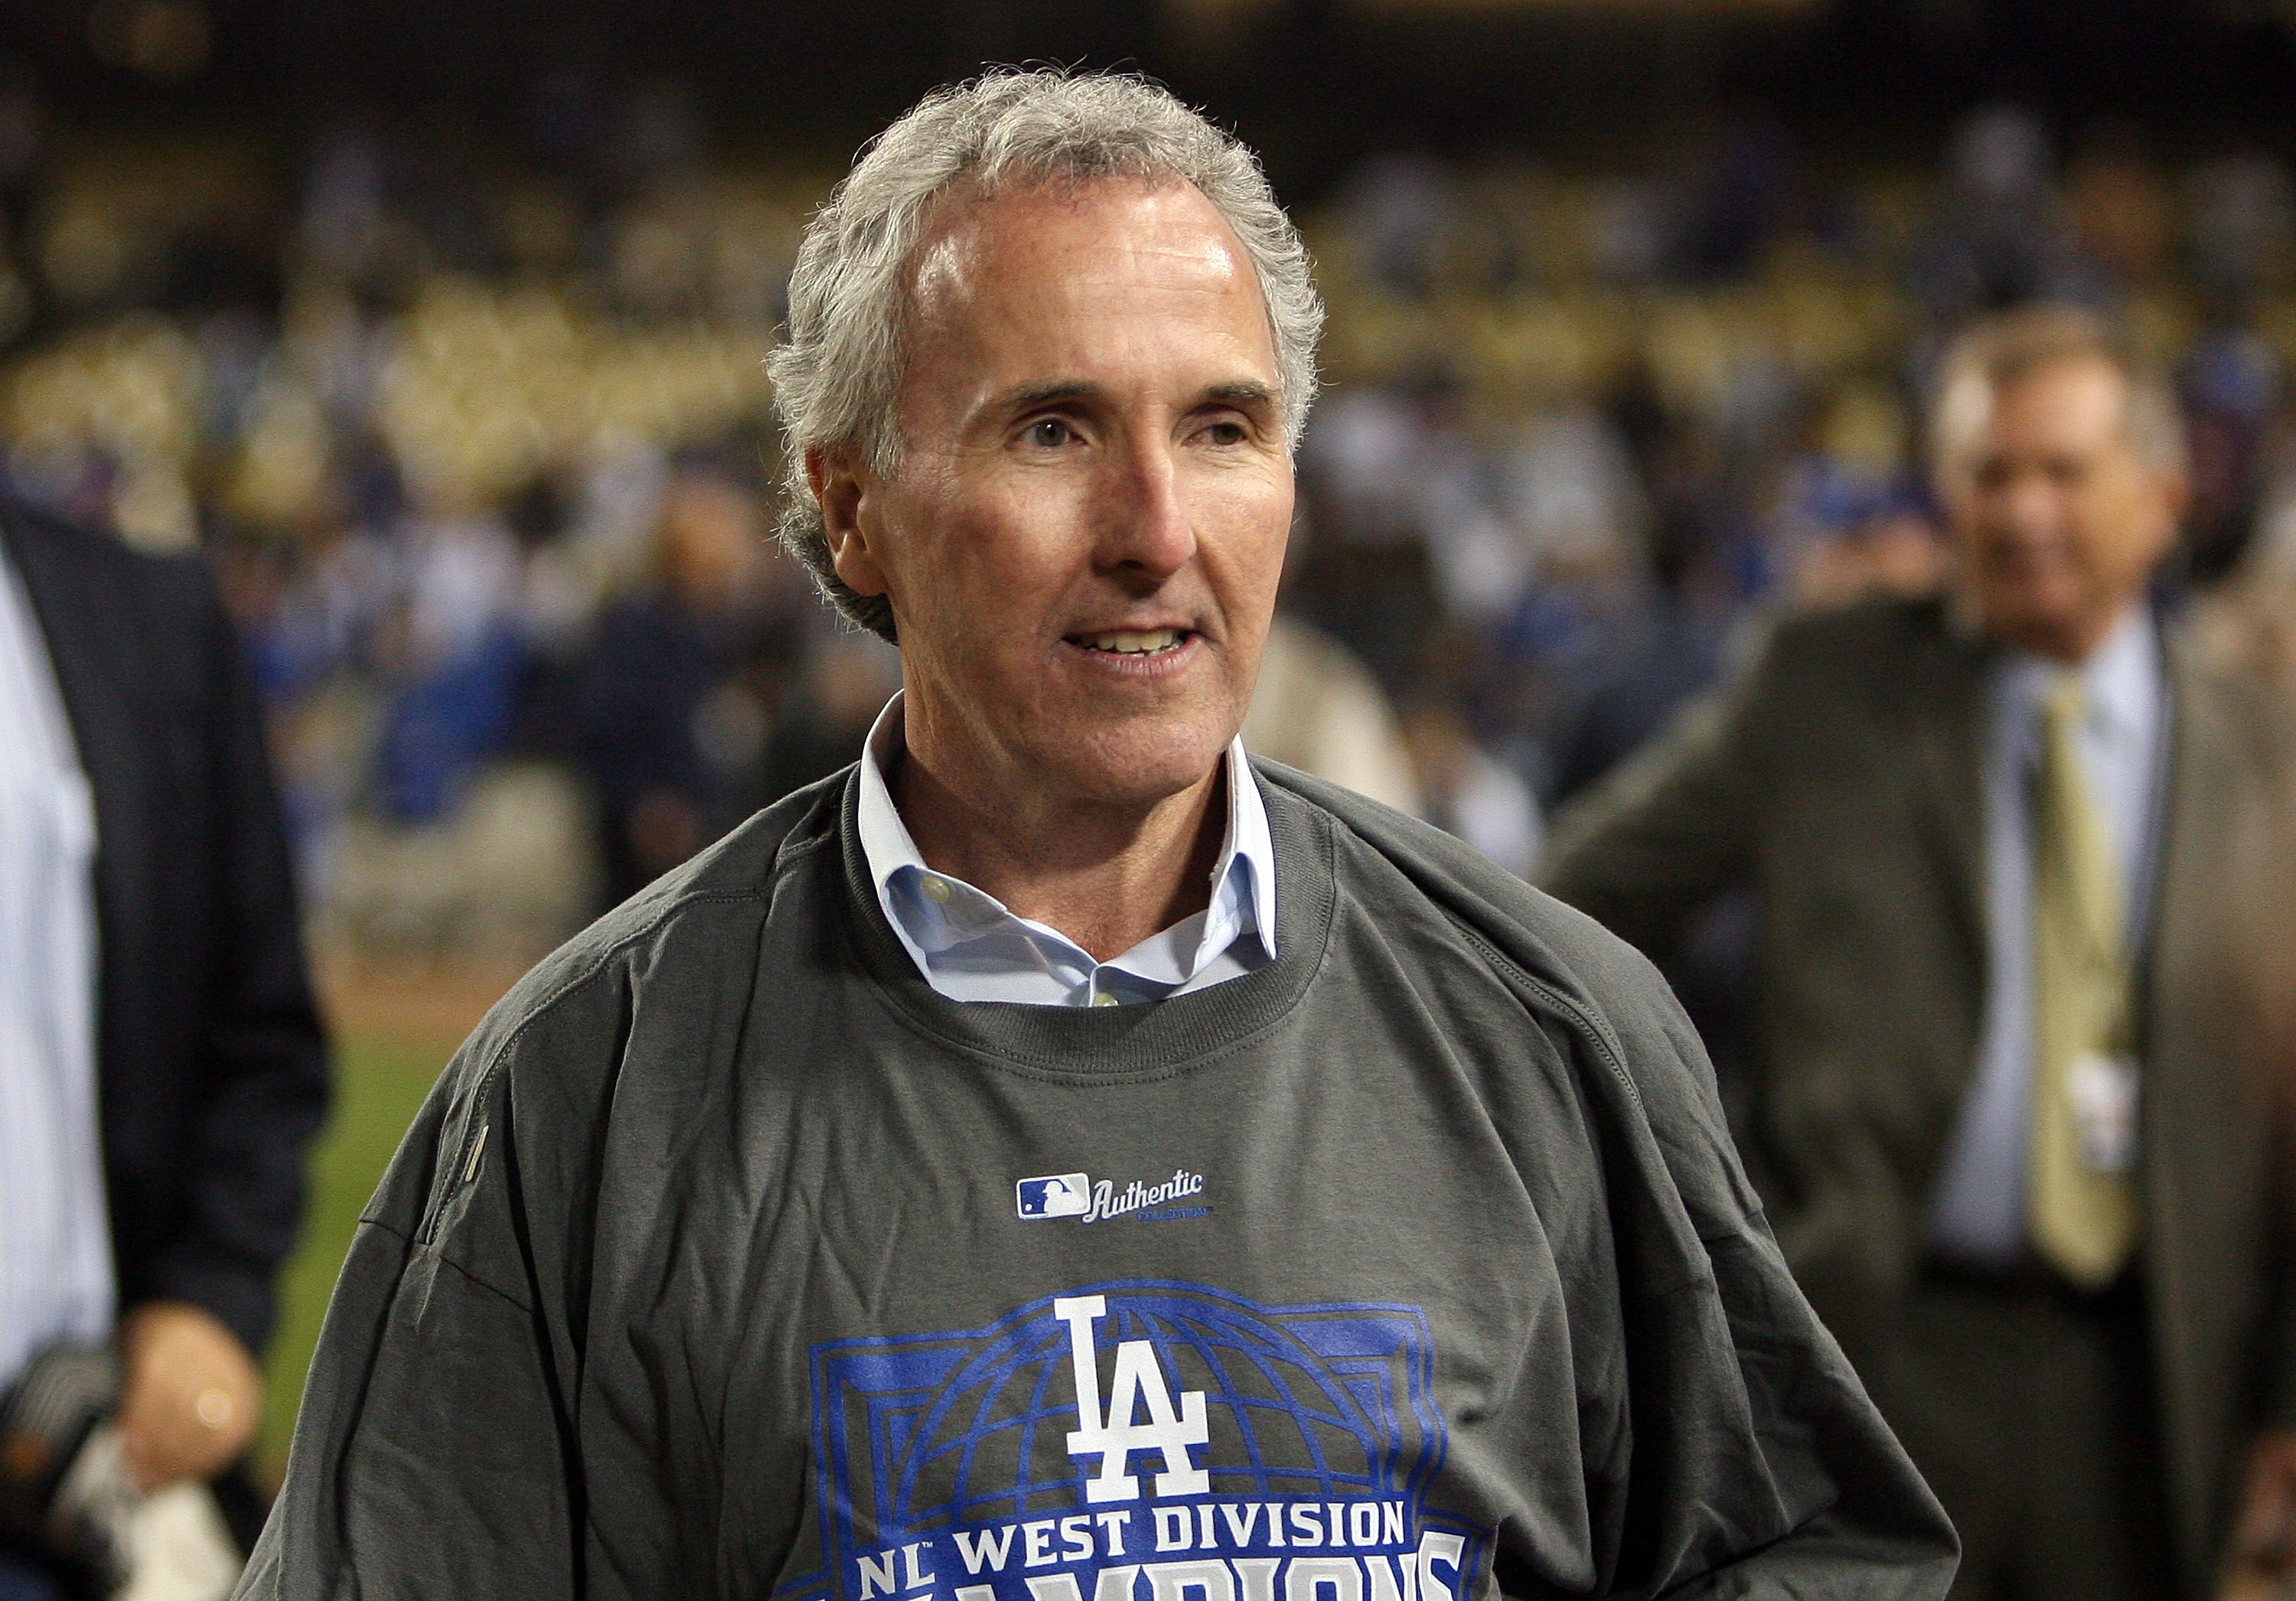 LOS ANGELES, CA - OCTOBER 03:  Owner Frank McCourt celebrates after winning the National League West against the Colorado Rockies on October 3, 2009 in Los Angeles, California.  (Photo by Jacob de Golish/Getty Images)